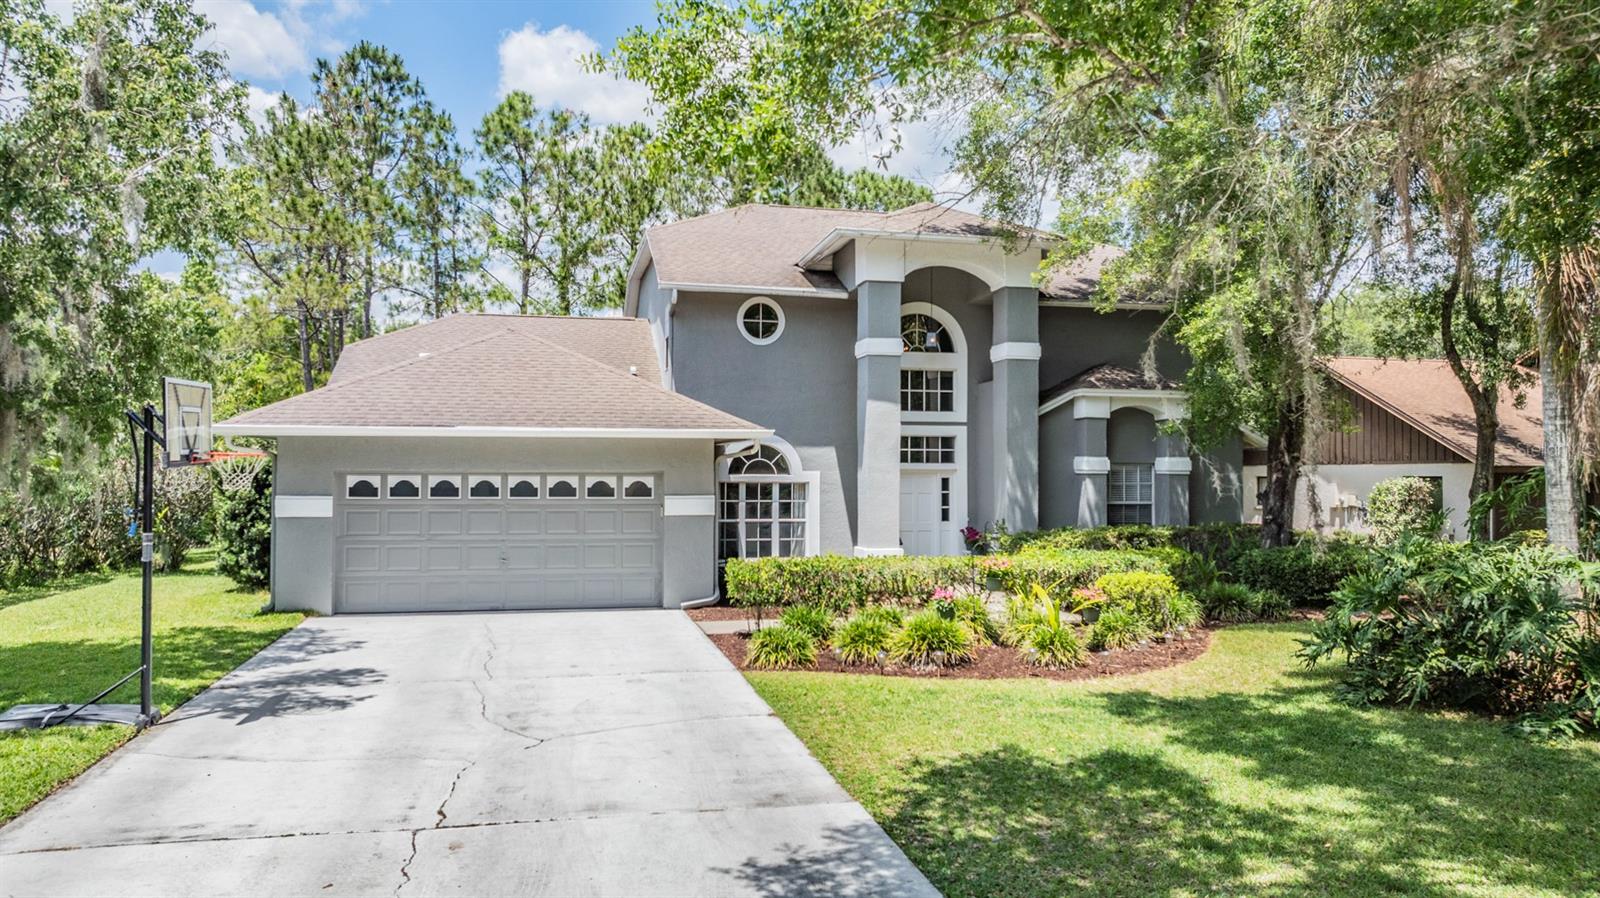 Front Exterior - 4 Bedrooms/3 Bathrooms/2 Car Garage Pool home with water access!  (3083 Sq Ft)